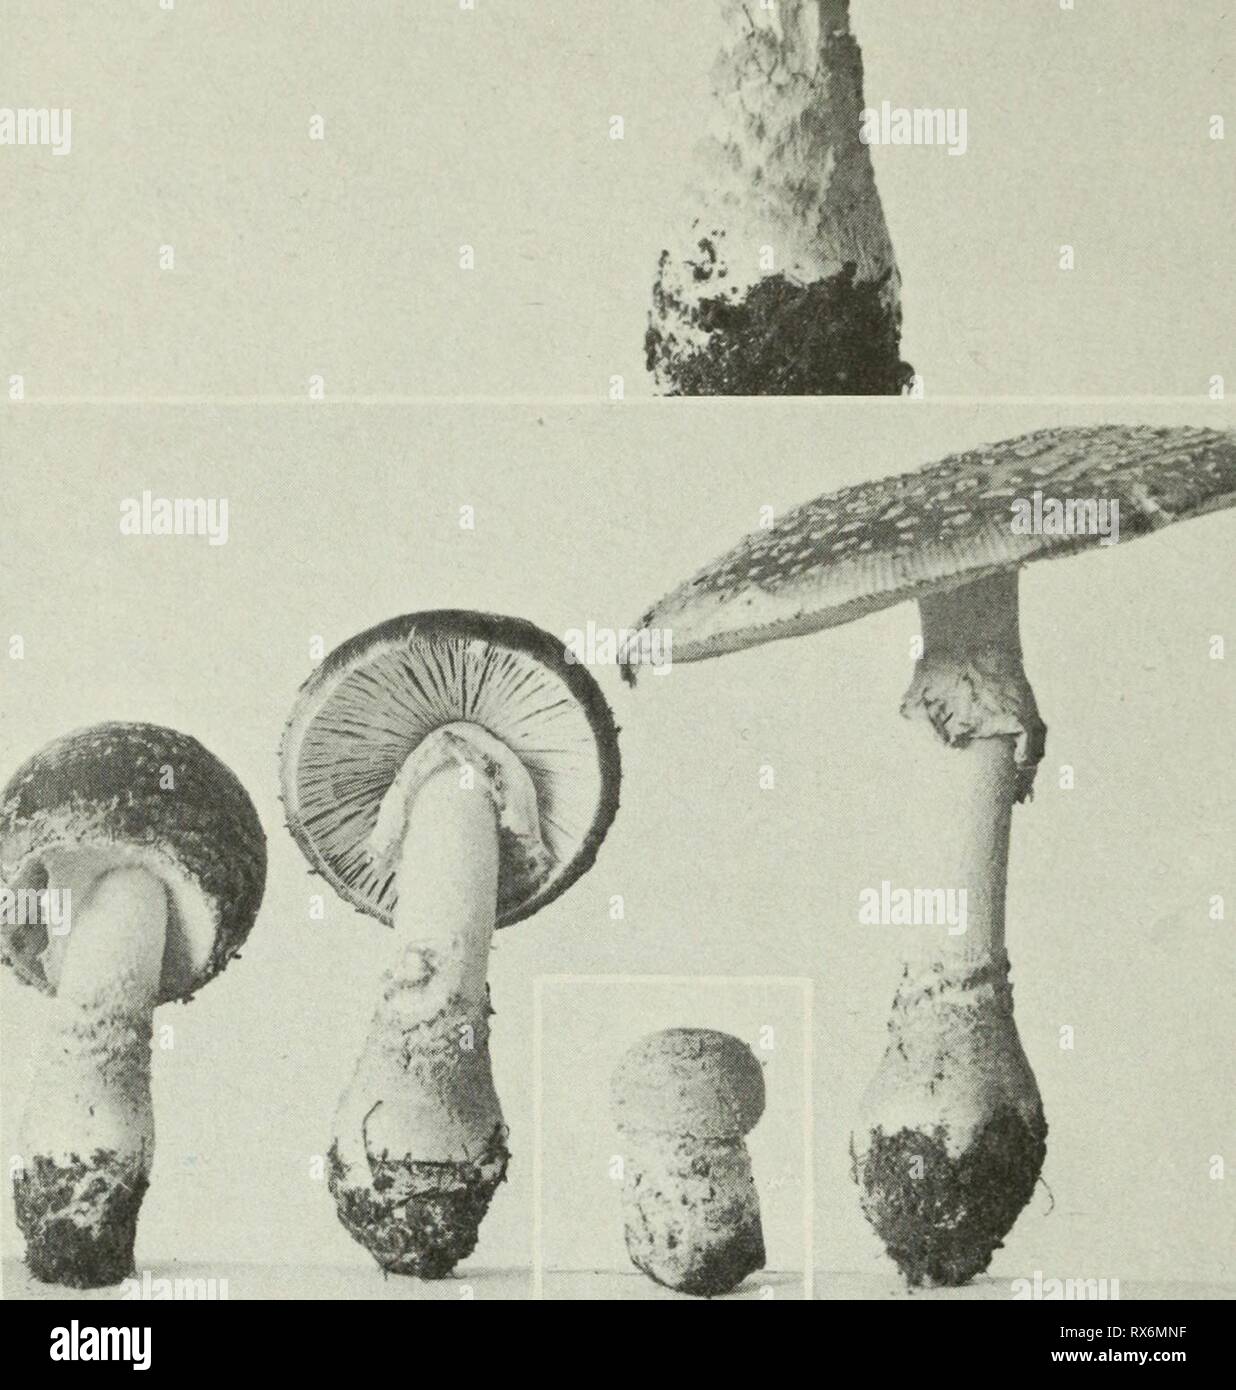 Edible and poisonous mushrooms of Edible and poisonous mushrooms of Canada ediblepoisonousm00grov Year: 1979  104 Figures 103-104. Amanita muscaria. 103, mature plant, note volva adhering to base of stipe in irregular rings and patches; 104, series of specimens illustrating the tearing of the volva to leave patches on the pileus and base of the stipe, and the tearing of the partial veil to form the annulus. 105. Russula abietina. 107. R. chamaeleontina. 109. R. Integra. 111. R. xerampelina. 113. Tricholoma pessundatum. Figures 105-114 106. 108. 110. 112. 114. aeruginea. decolorans. R. R. R. ma Stock Photo